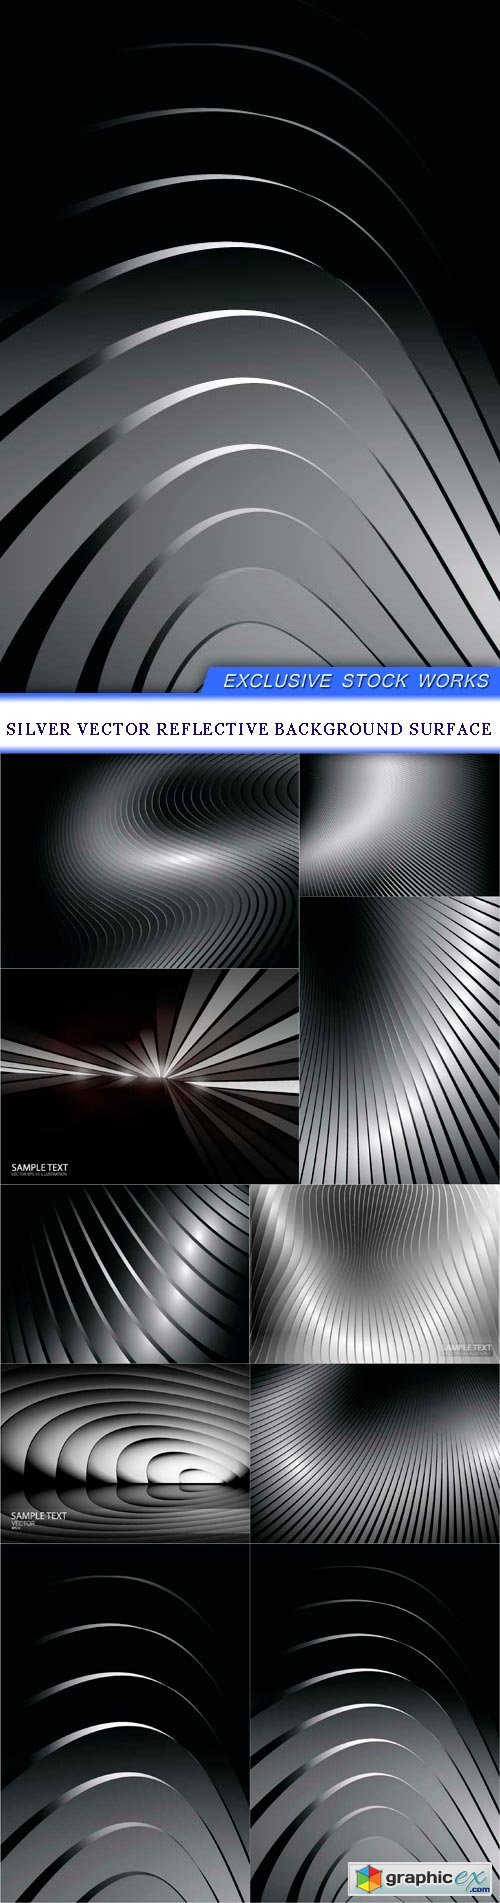 Silver vector reflective background surface 10X EPS